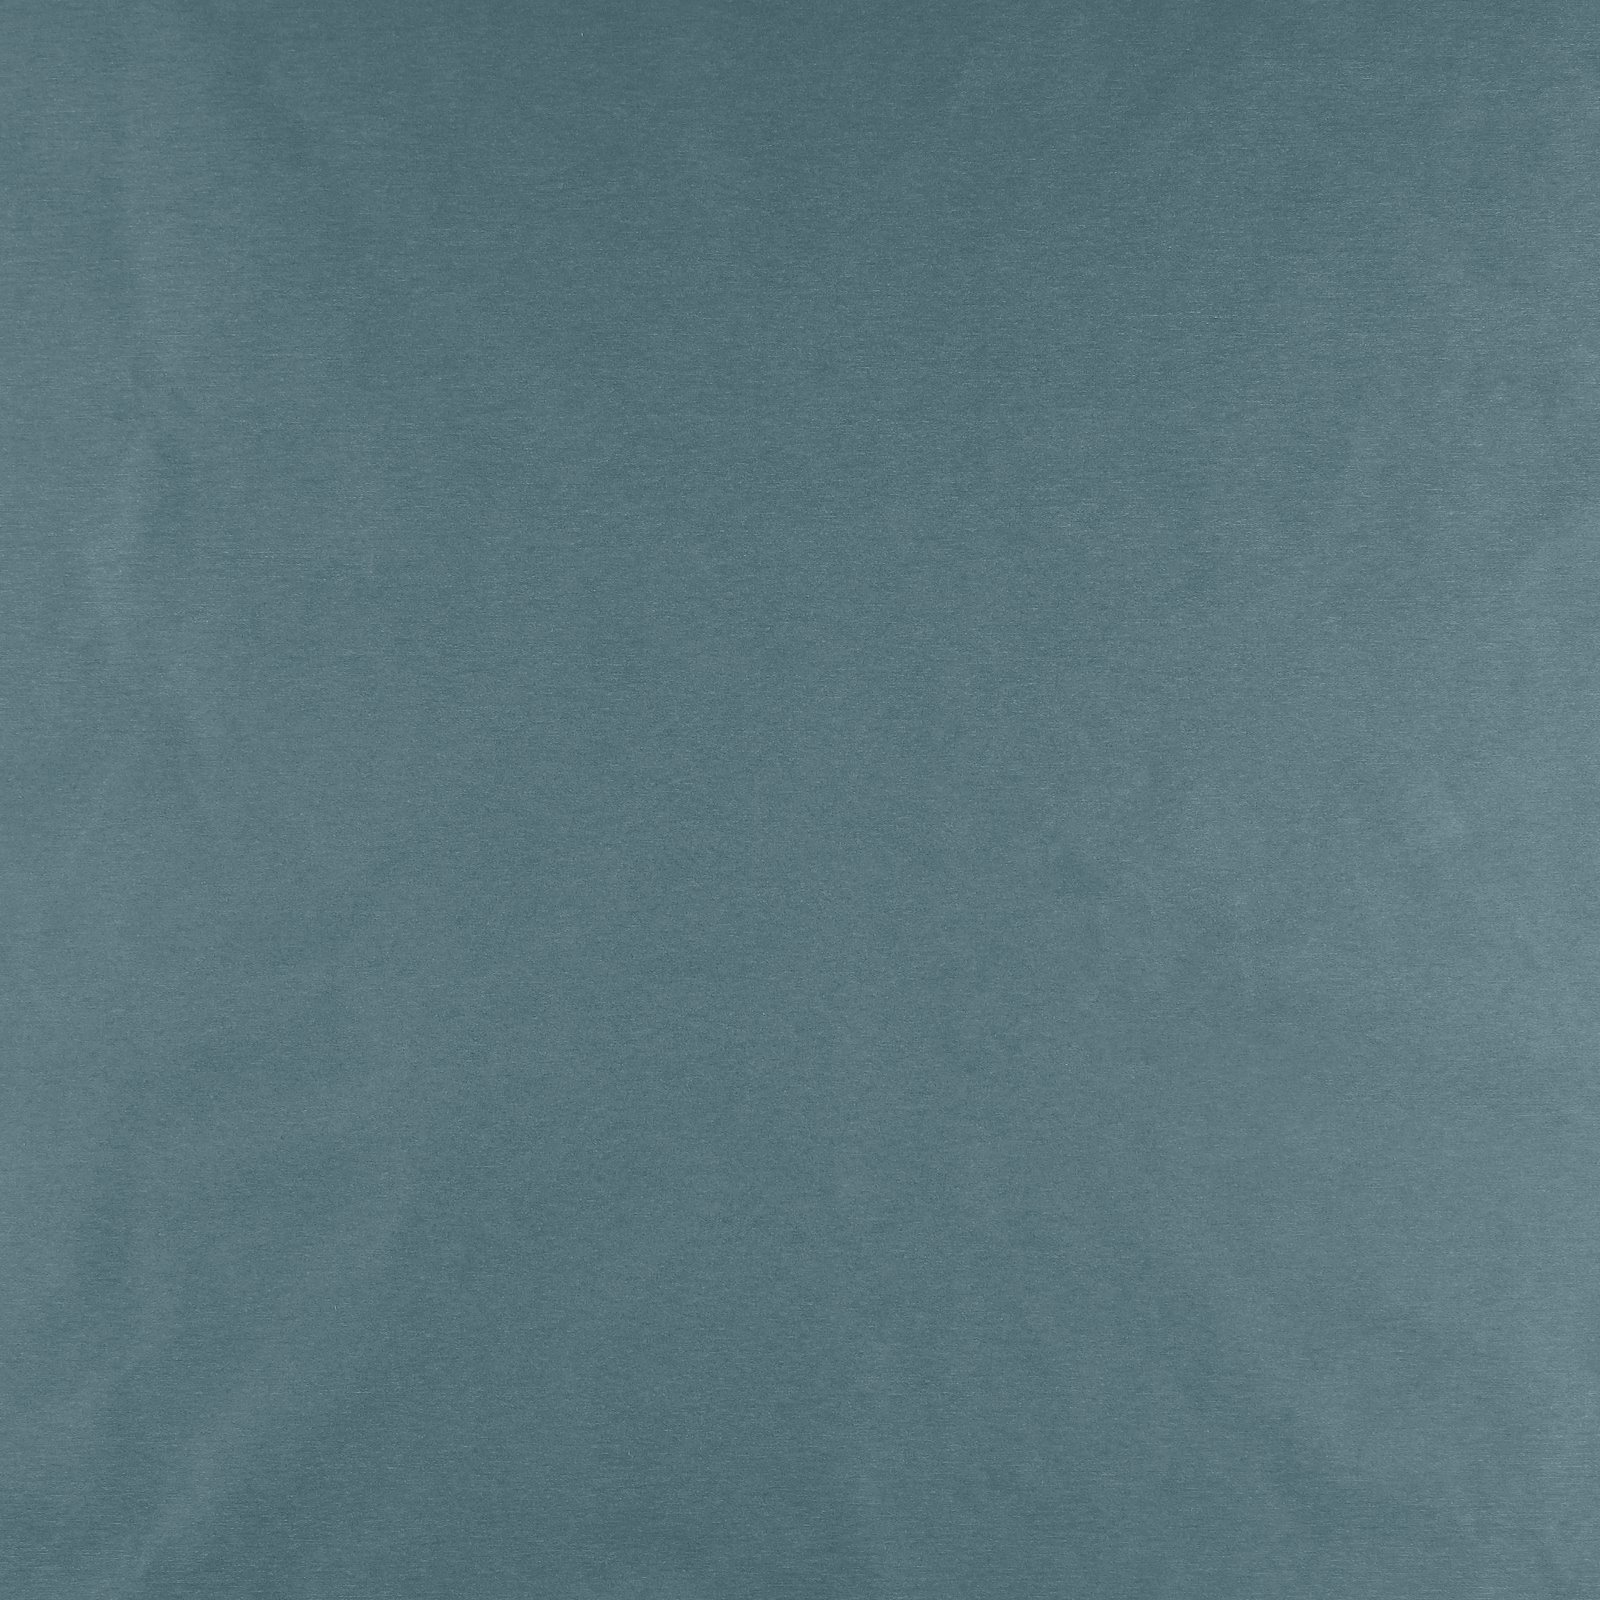 Woven oilcloth dusty blue 870282_pack_solid